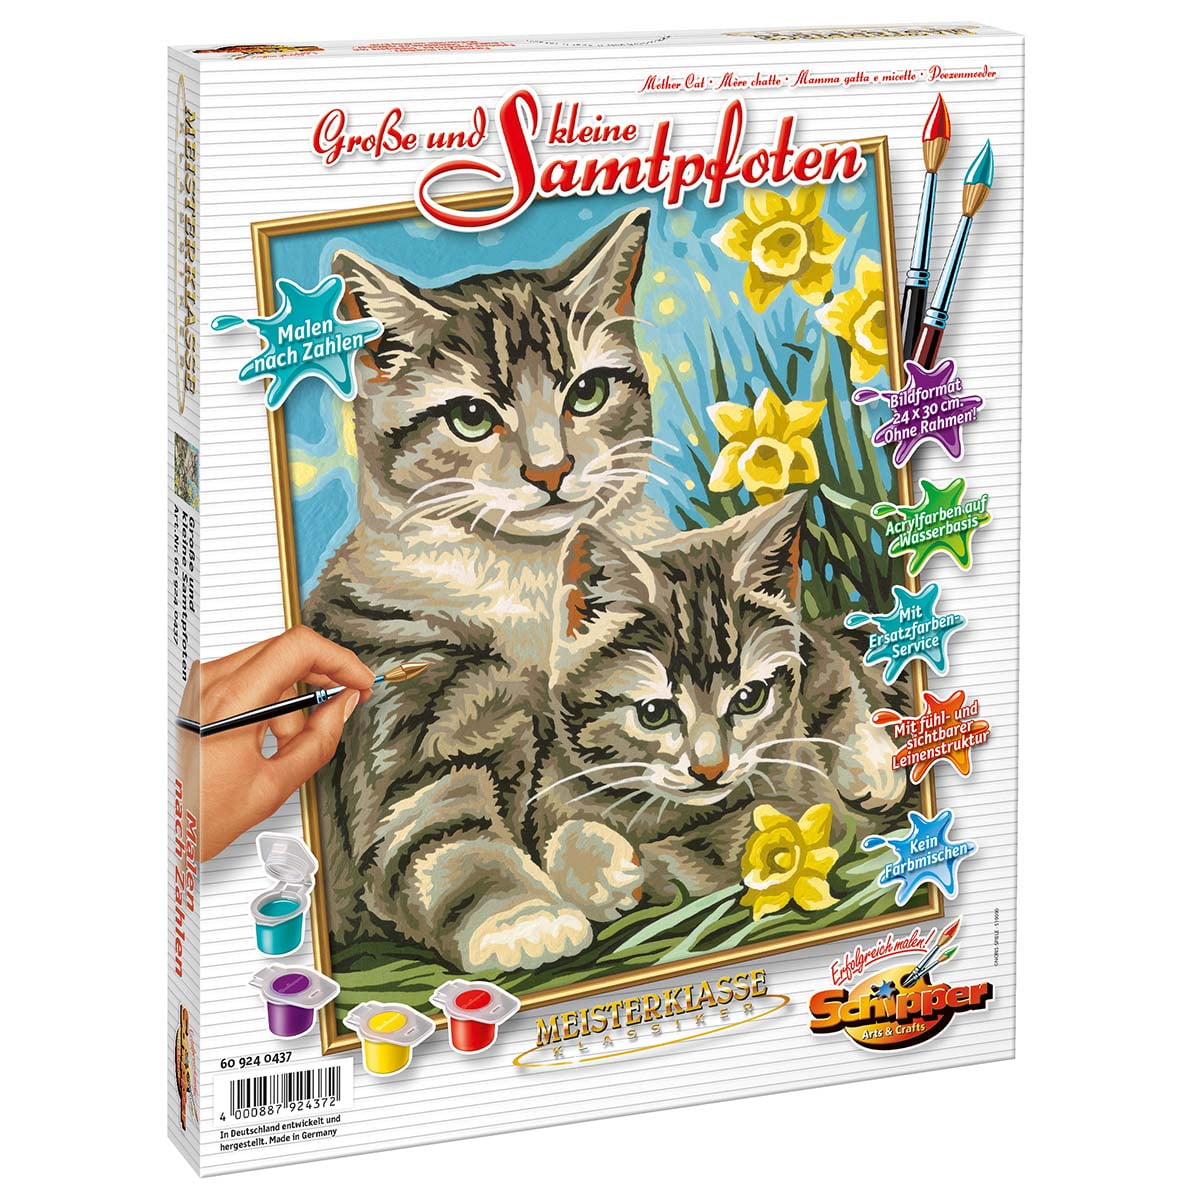 Paint Kit by Number Mother Cat Schipper